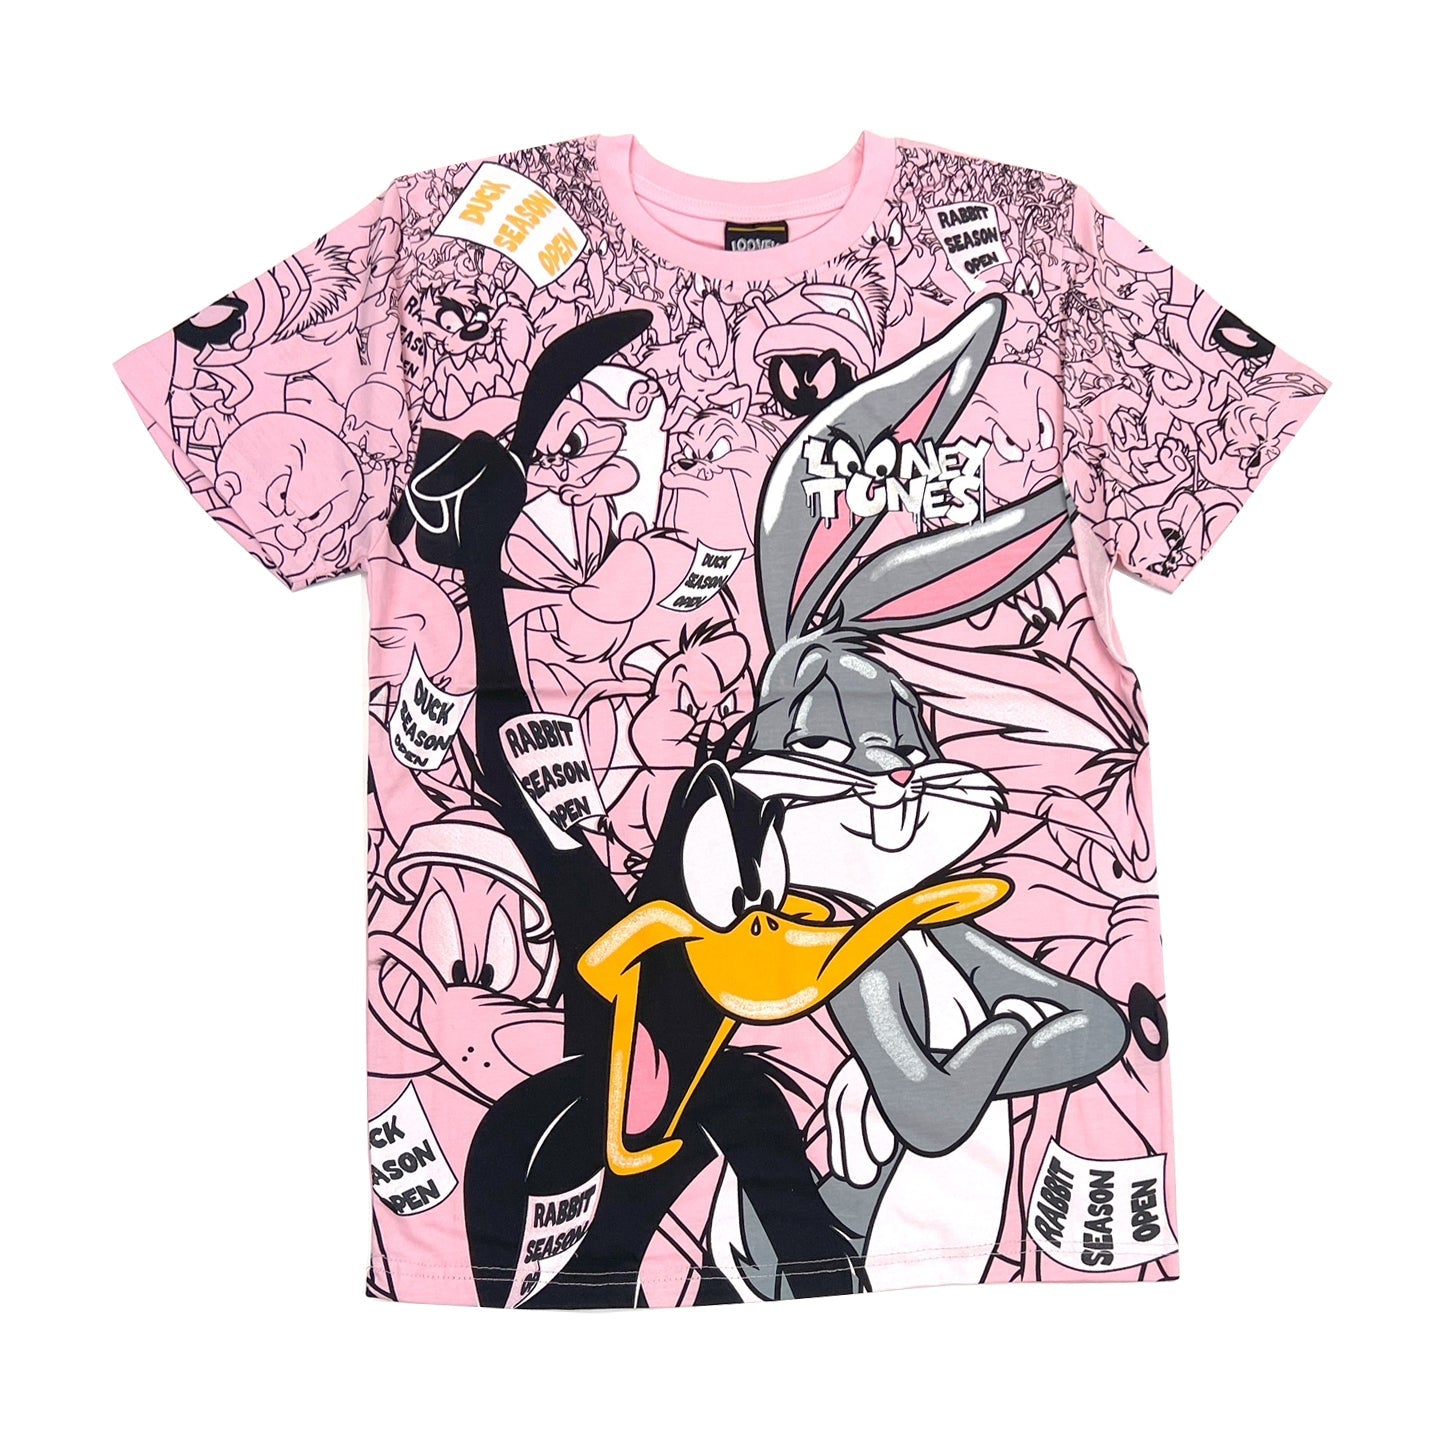 2 Tee $16.99 Tunes & Bunny Looney (Pink) Daffy Bugs $30 for /